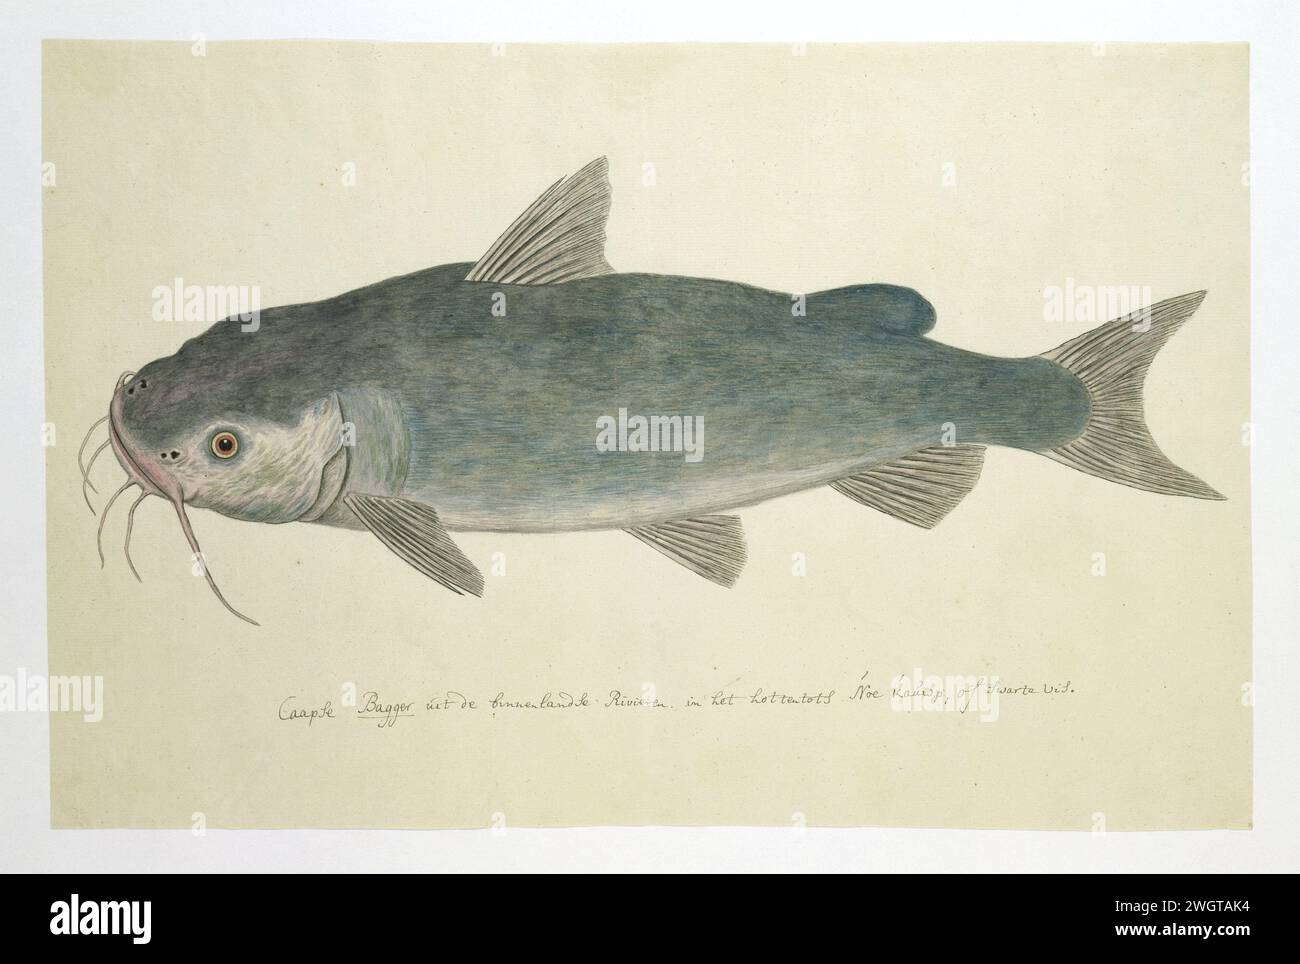 Clarias stappersii (catfish), 1777 - 1786 drawing Unidentified, occurs in the inland rivers.  paper. pencil. chalk brush Stock Photo